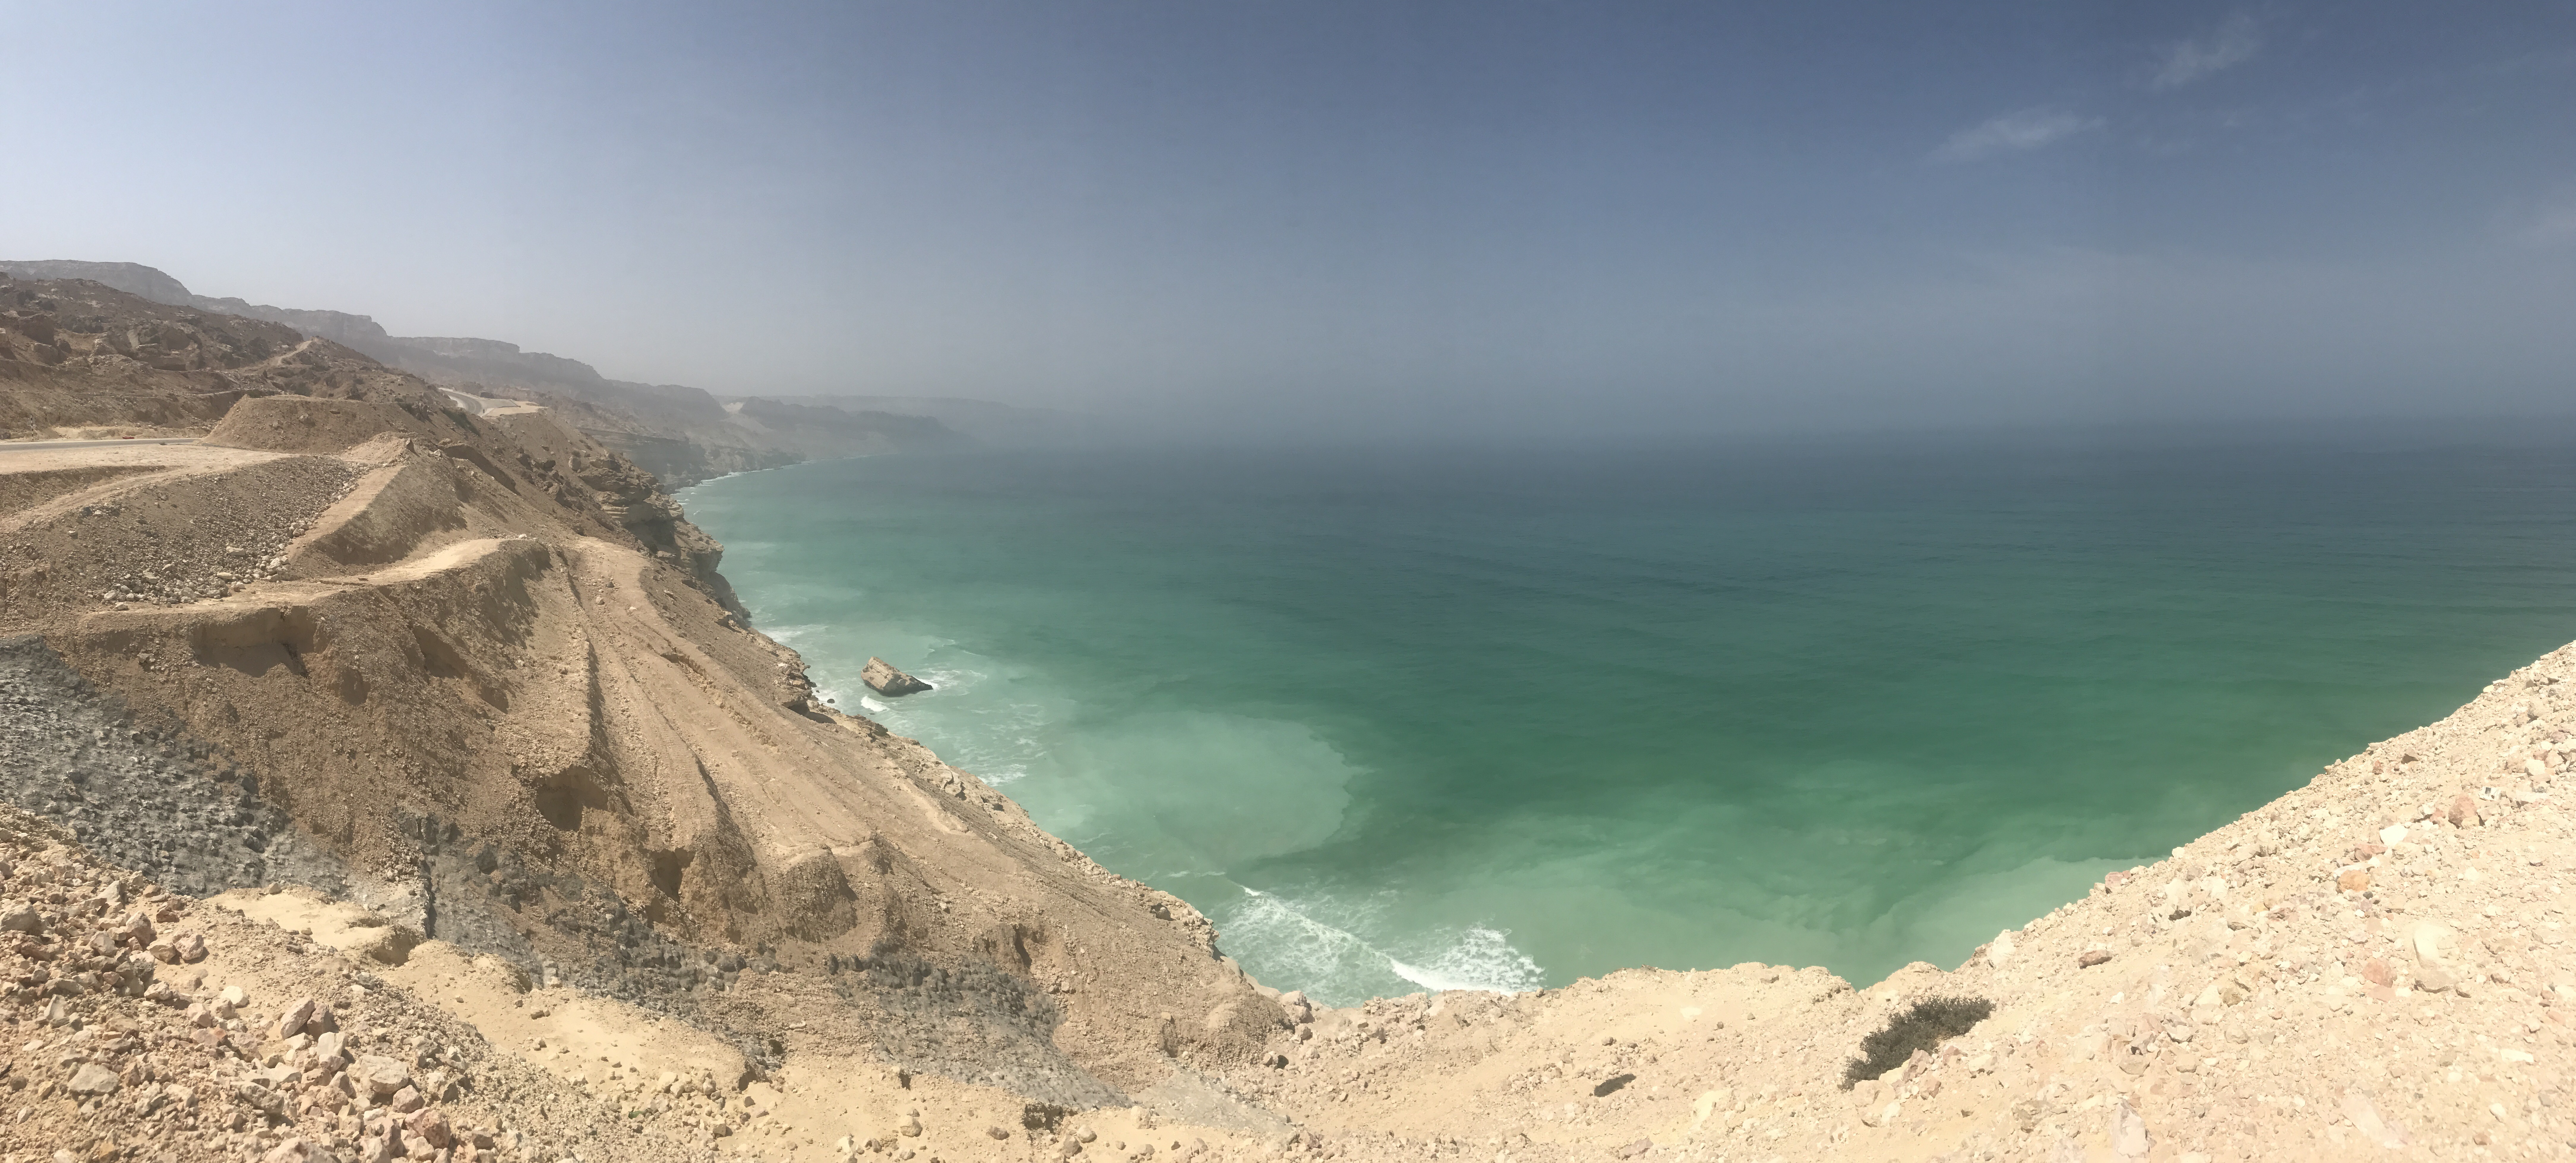 In pictures: Charms of Oman's Dhofar beckon tourists